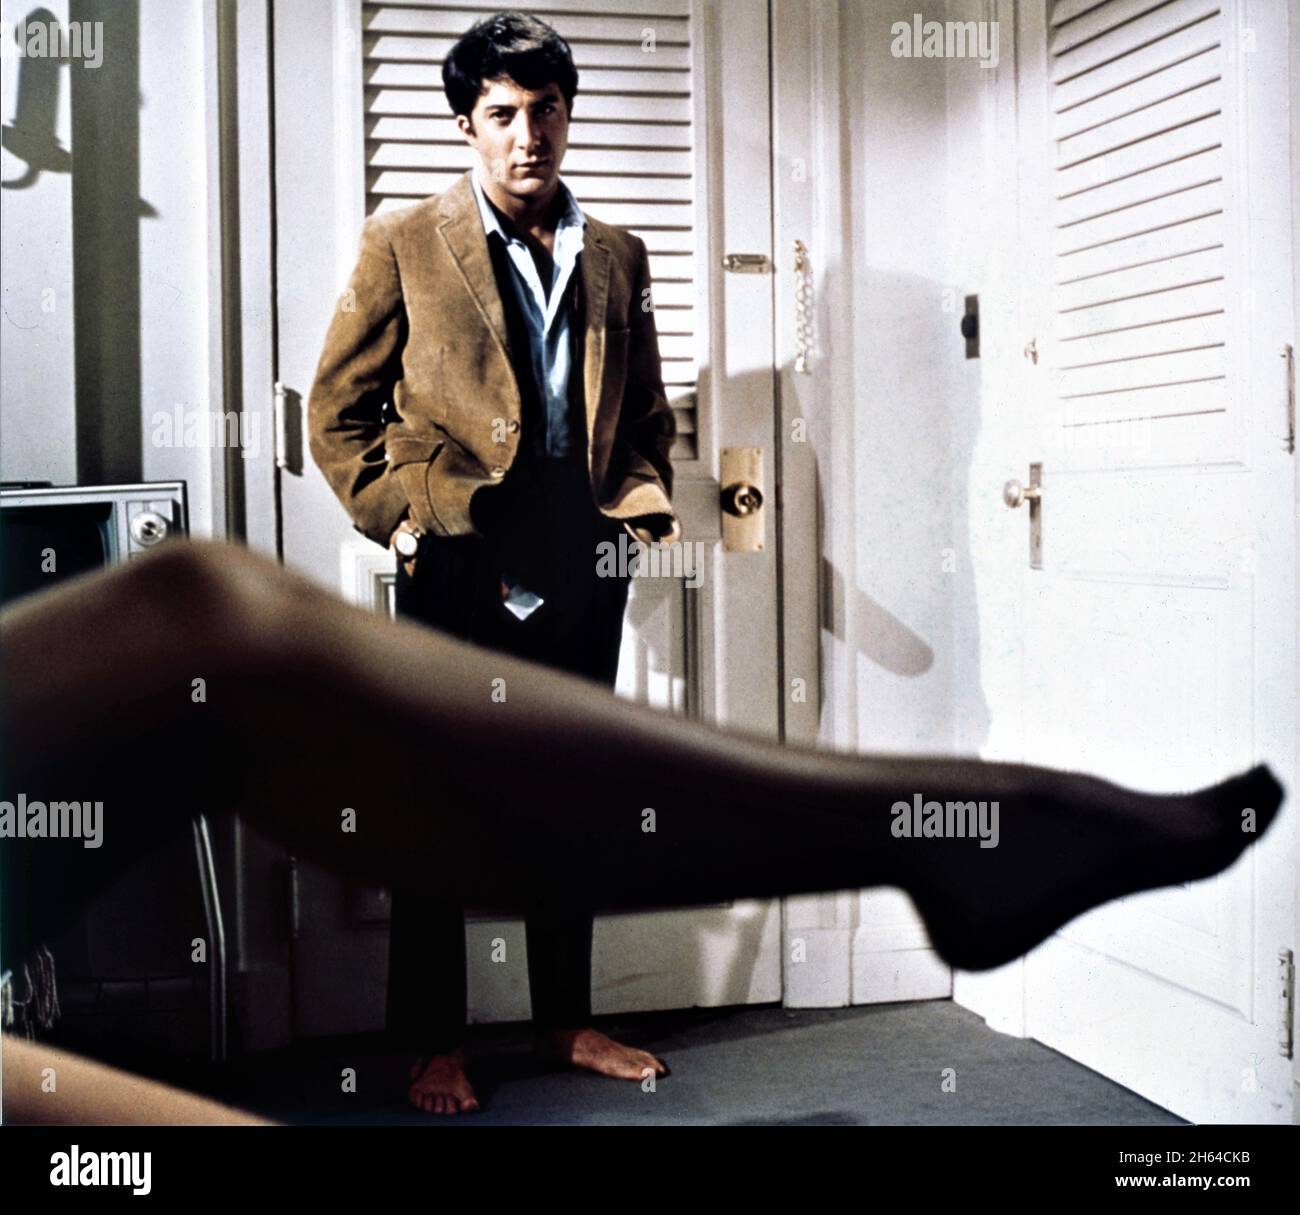 DUSTIN HOFFMAN in THE GRADUATE 1967 director MIKE NICHOLS novel Charles Webb screenplay Calder Willingham and Buck Henry music Simon and Garfunkel Lawrence Truman Productions / Embassy Pictures (US) - United Artists (UK) Stock Photo